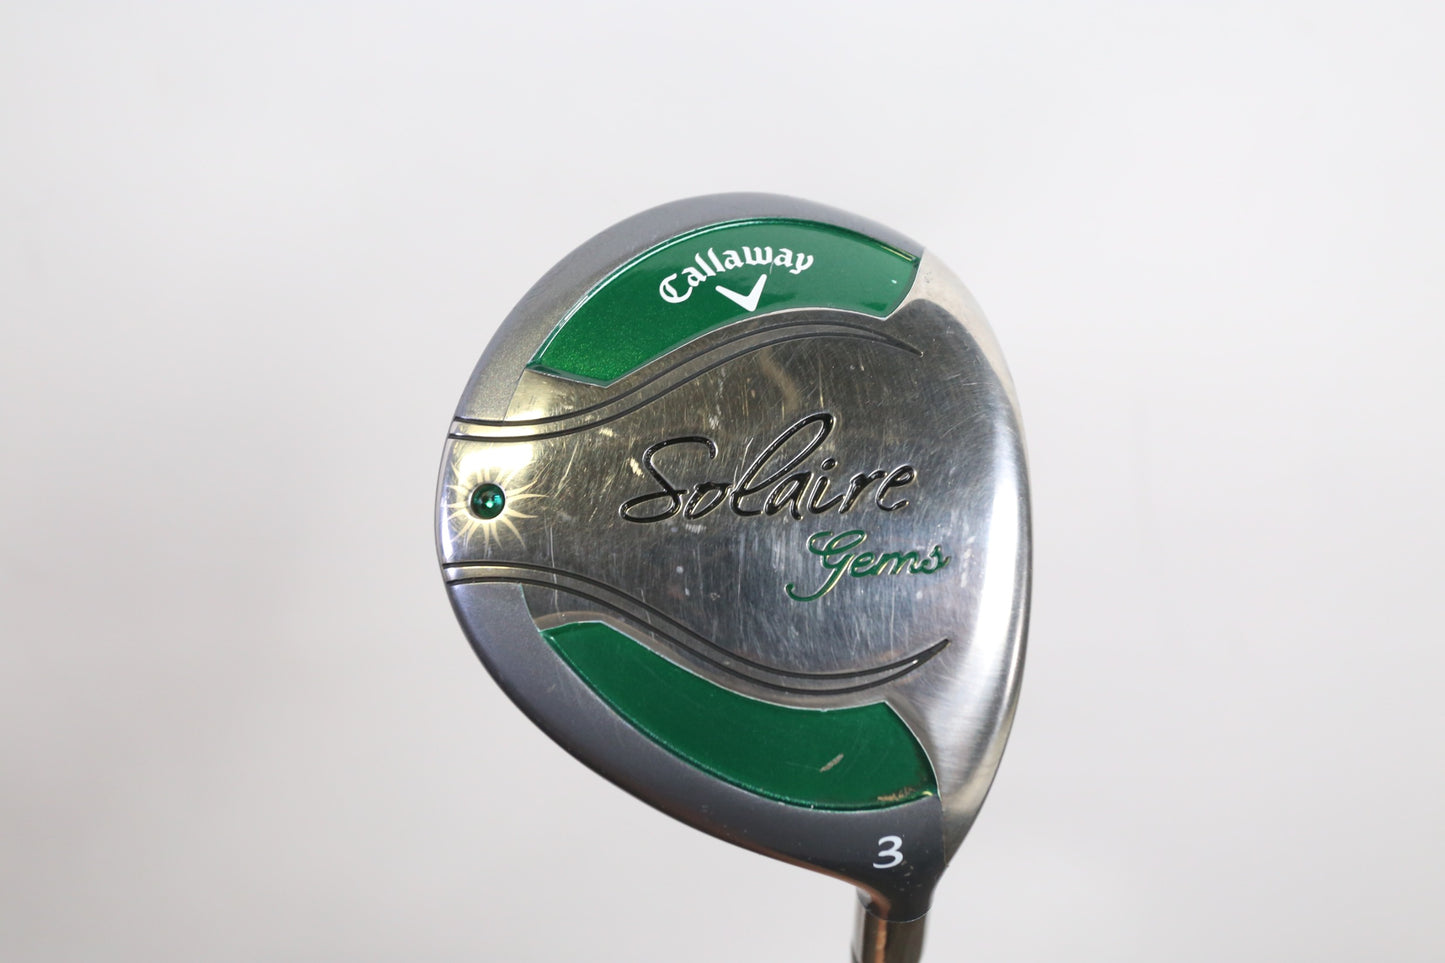 Used Callaway Solaire 3-Wood - Right-Handed - 15 Degrees - Ladies Flex